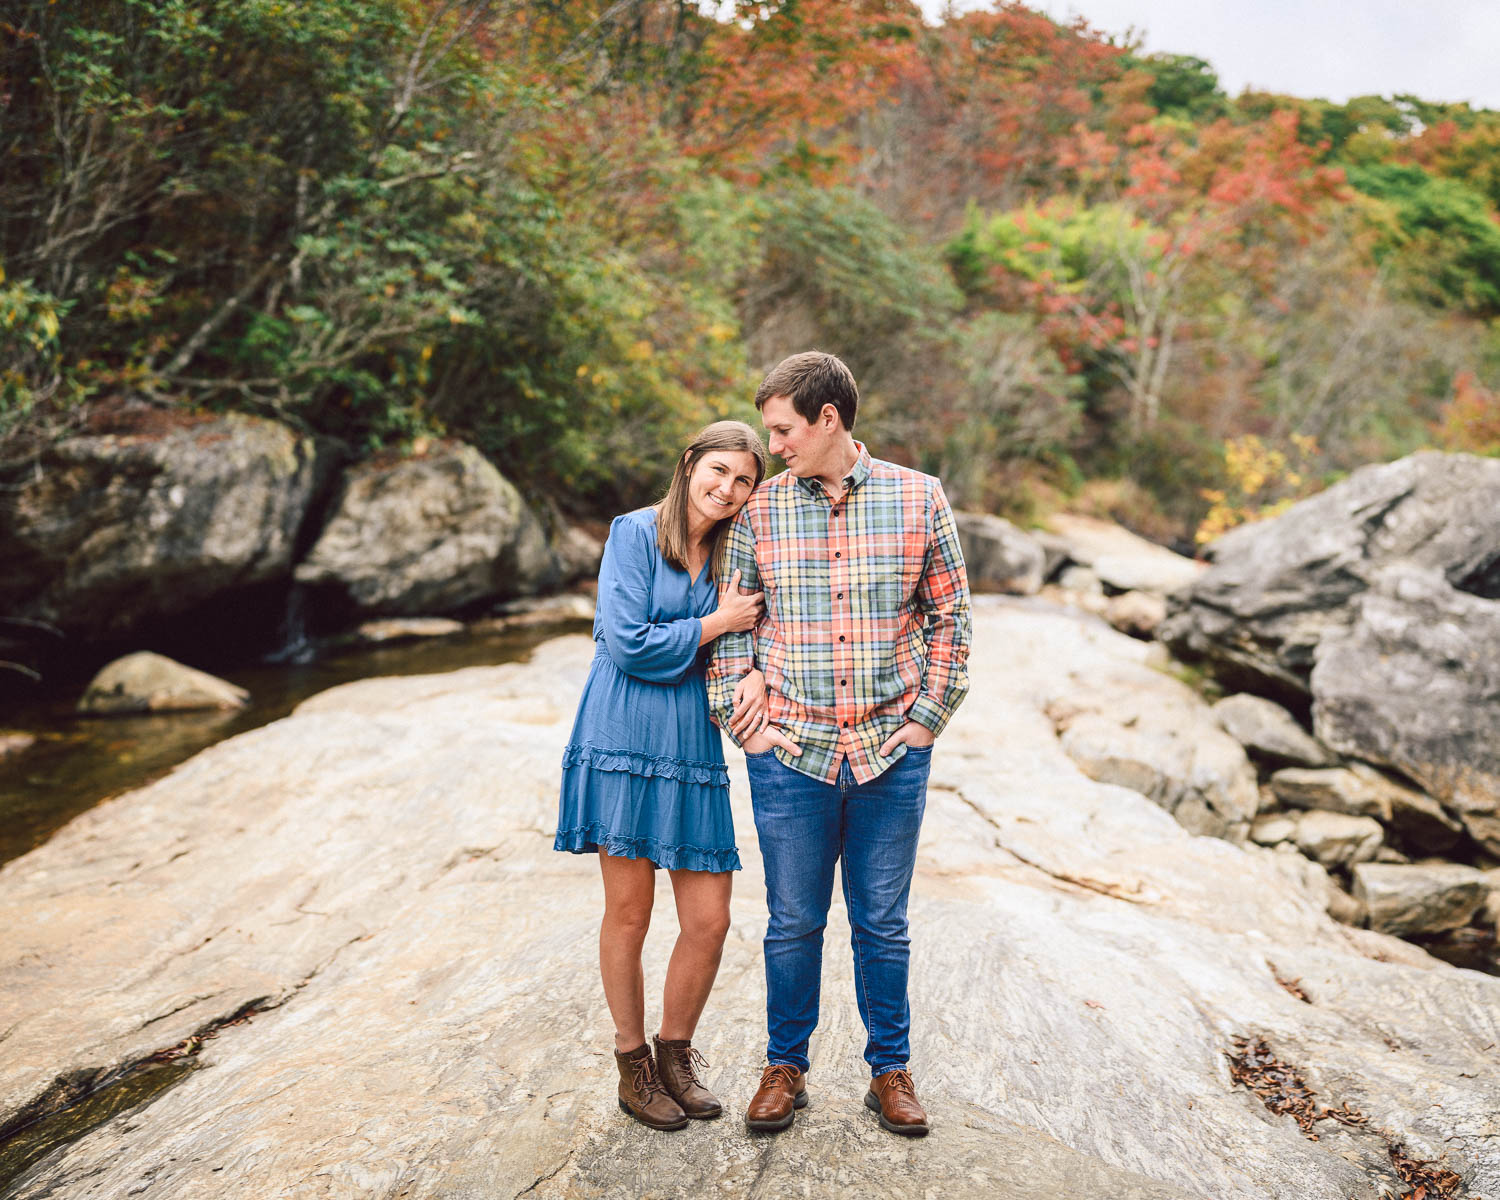 Couple pose for photo in fall